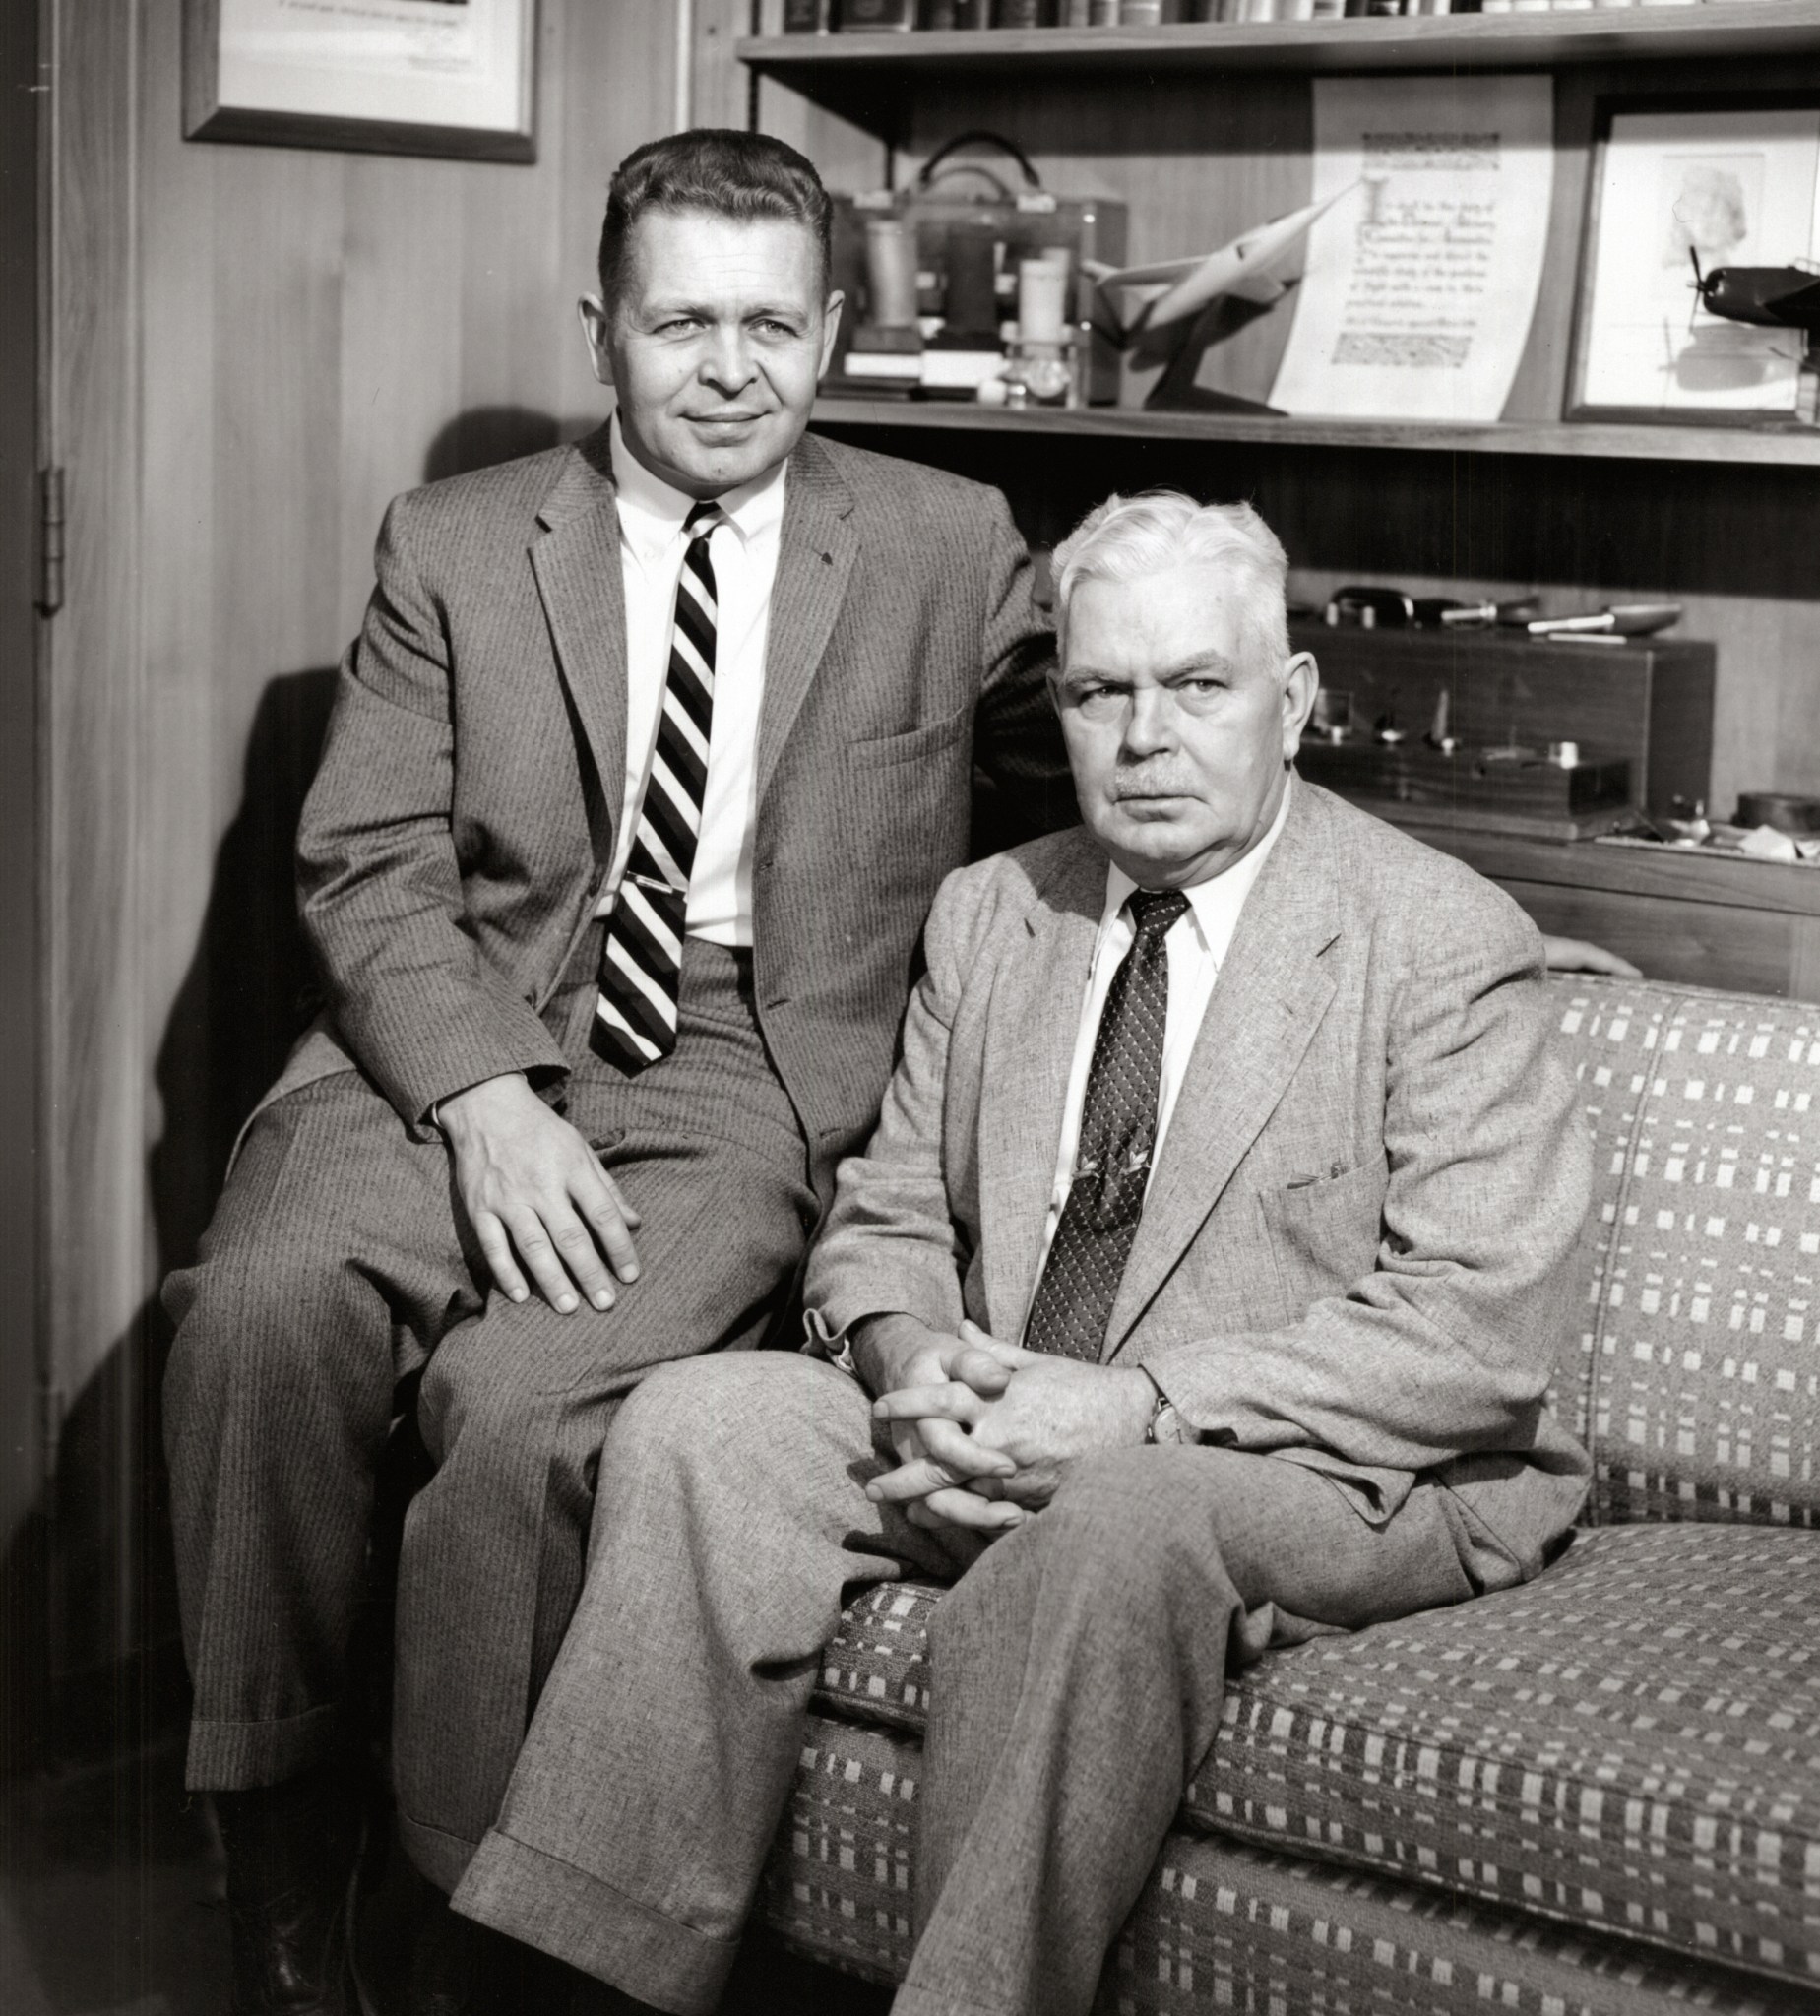 Two men seated on couch.